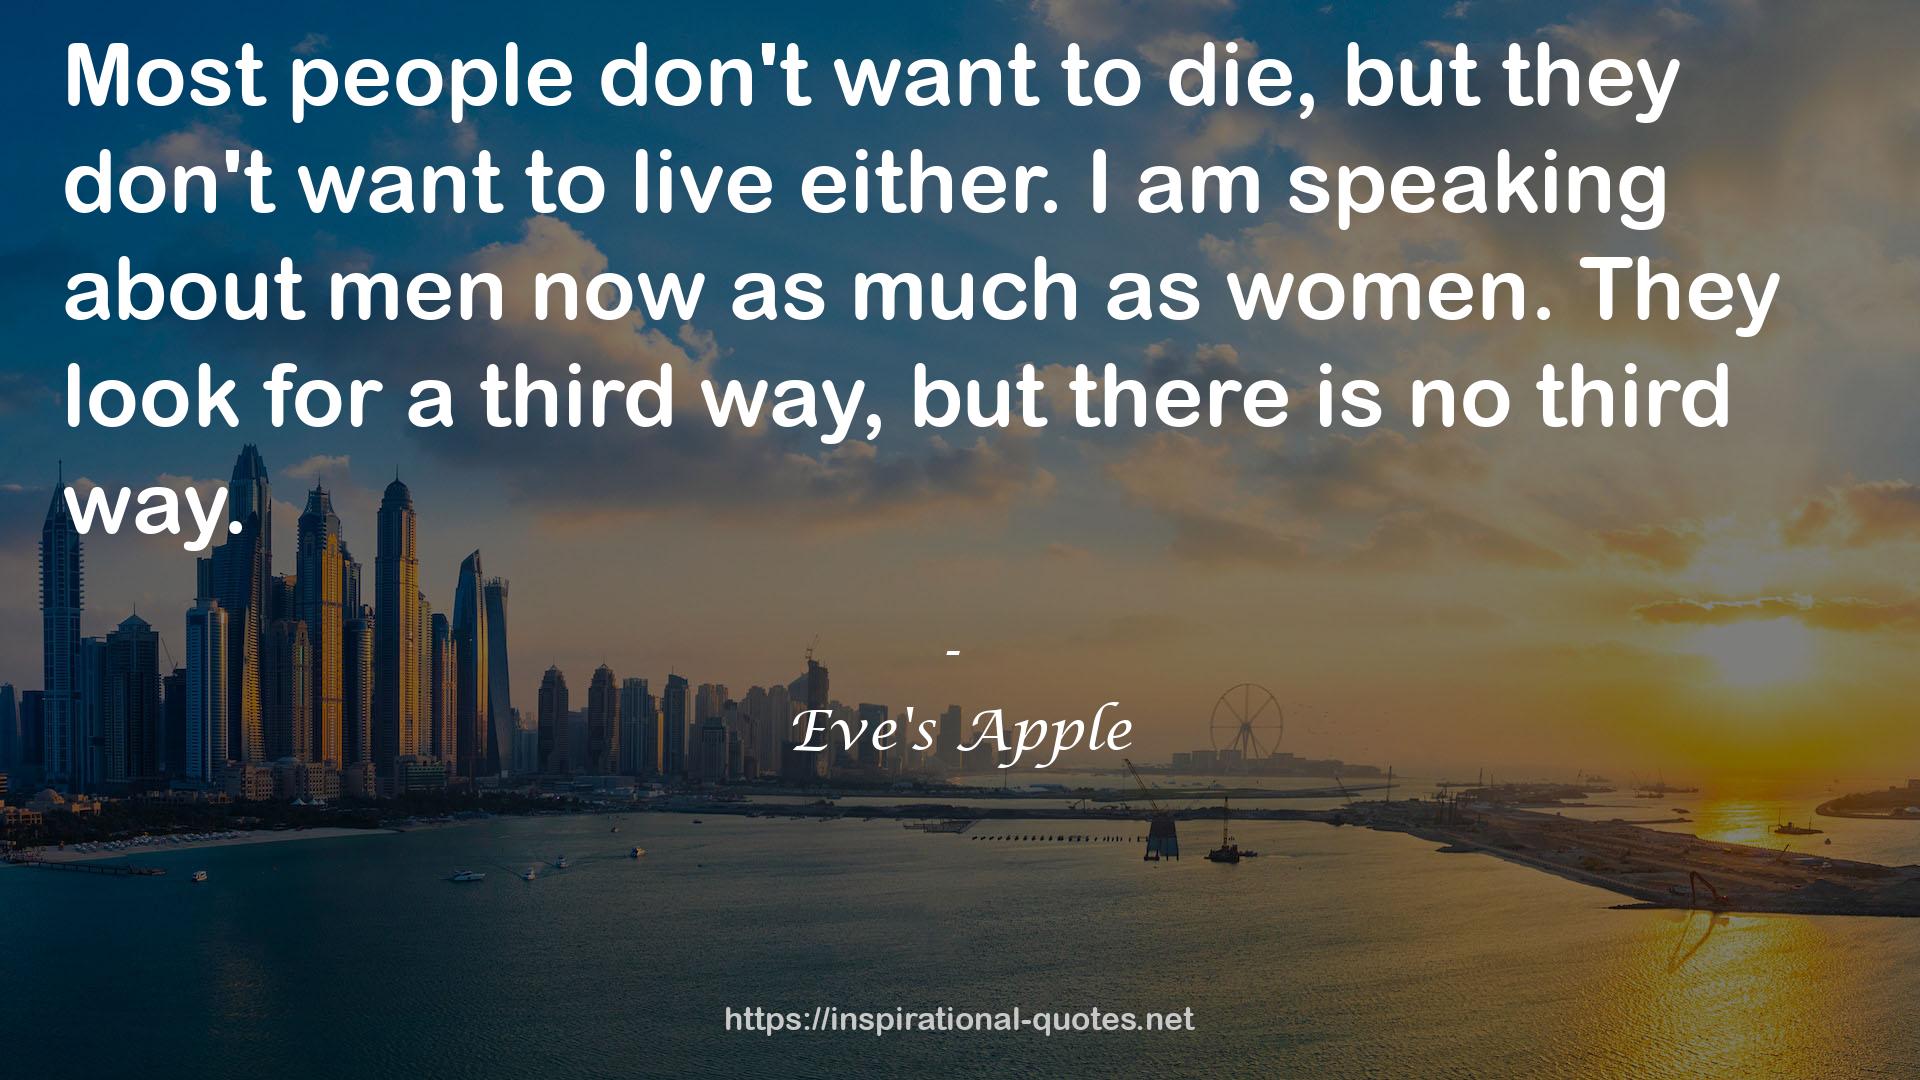 Eve's Apple QUOTES